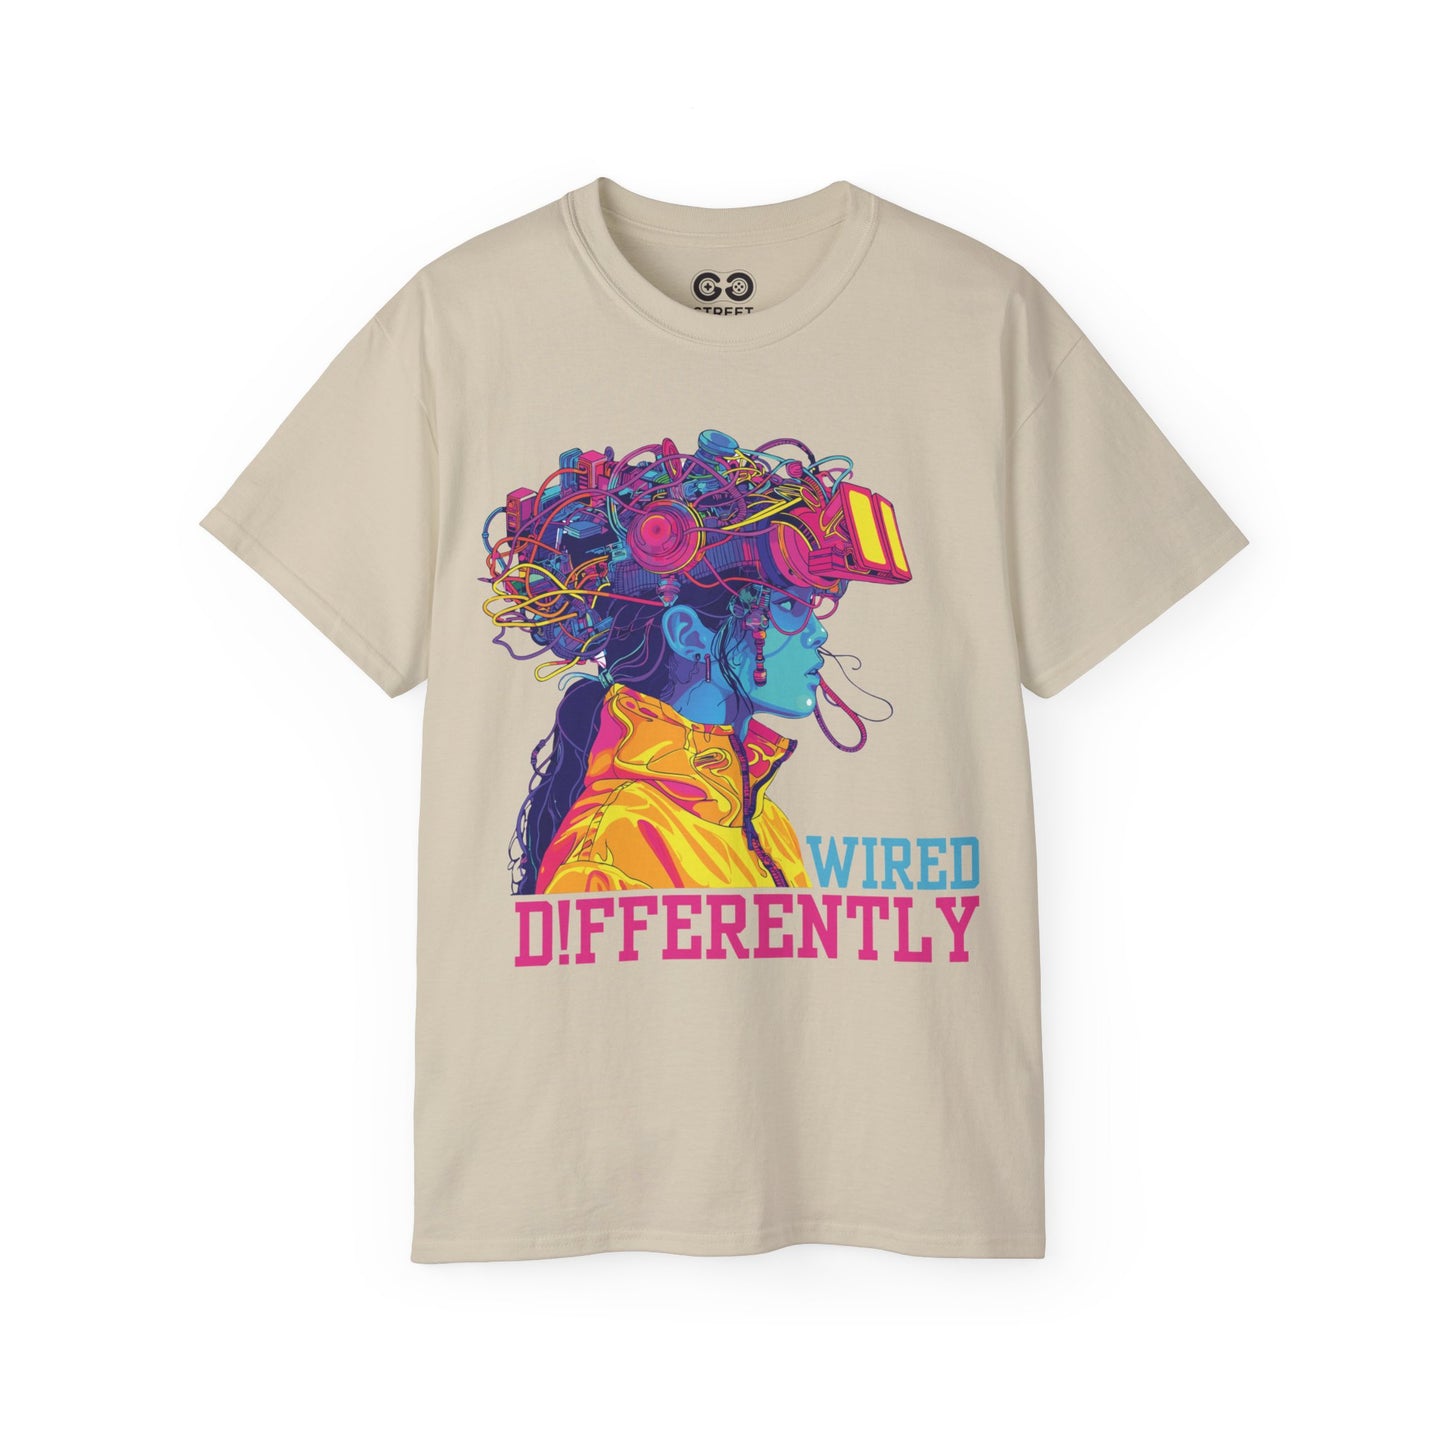 D!FFERENTLY WIRED - Unisex Ultra Cotton Tee